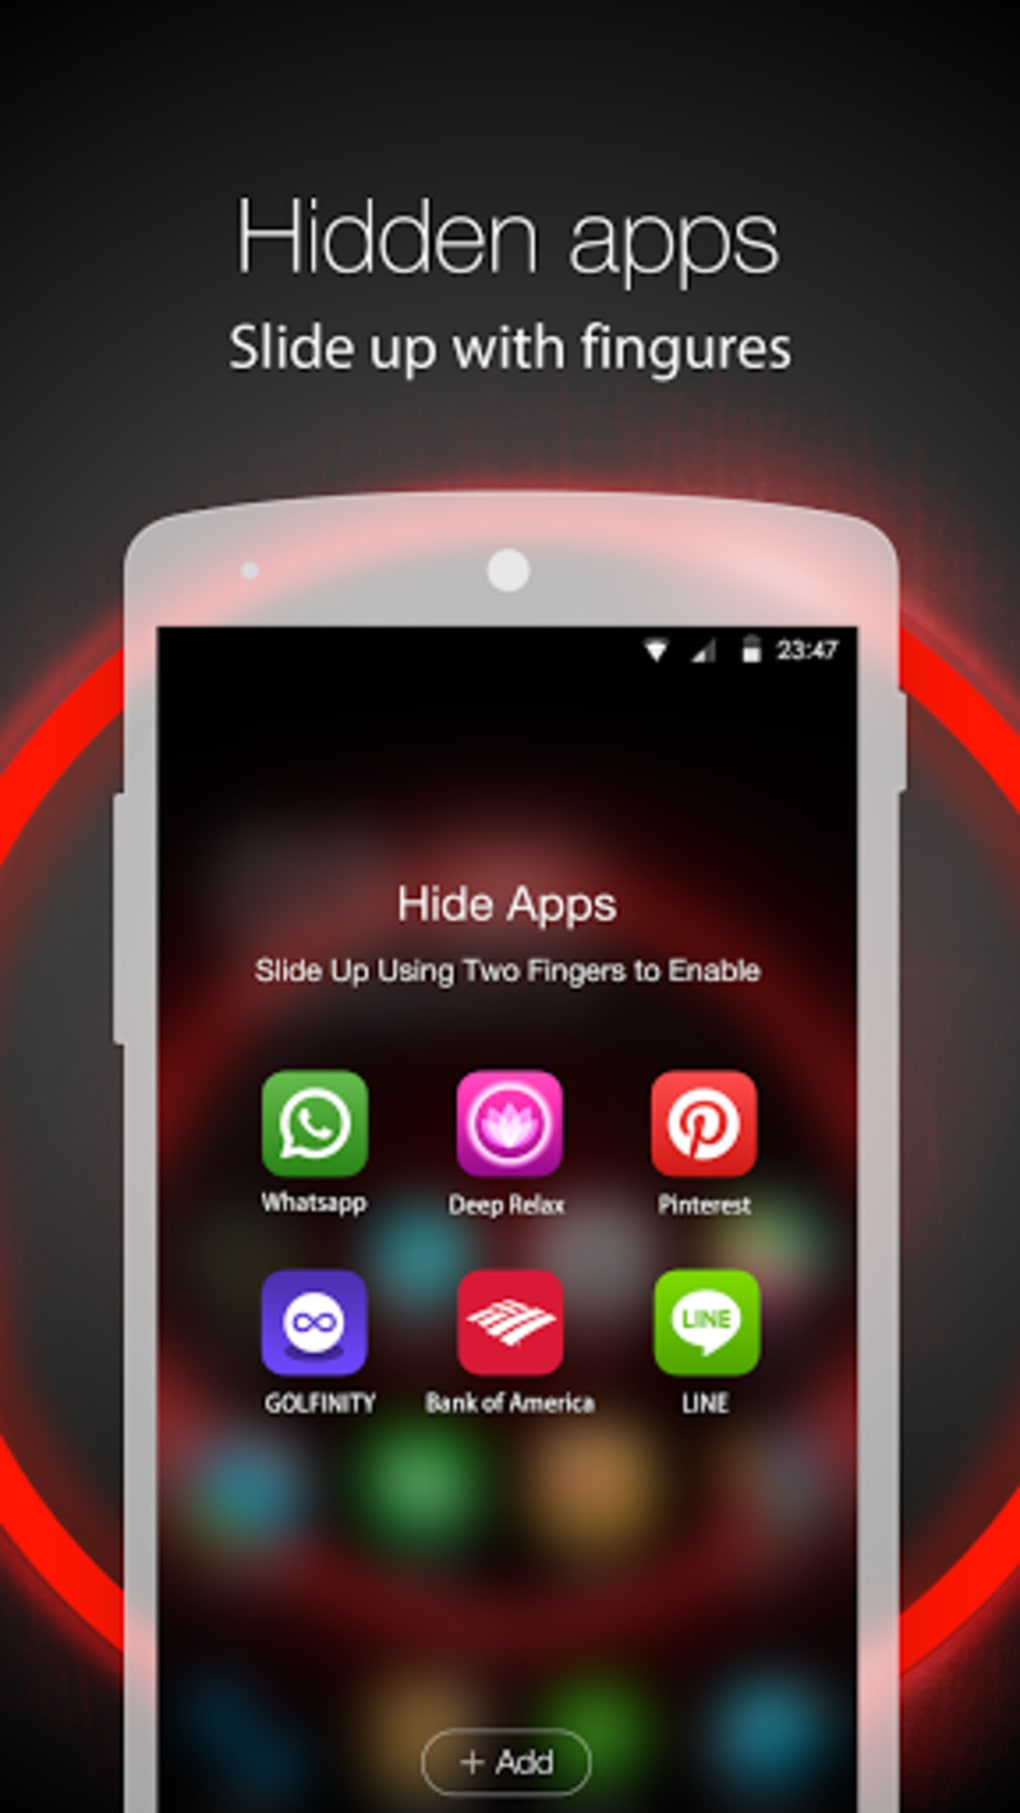 hola launcher for android phone no ads